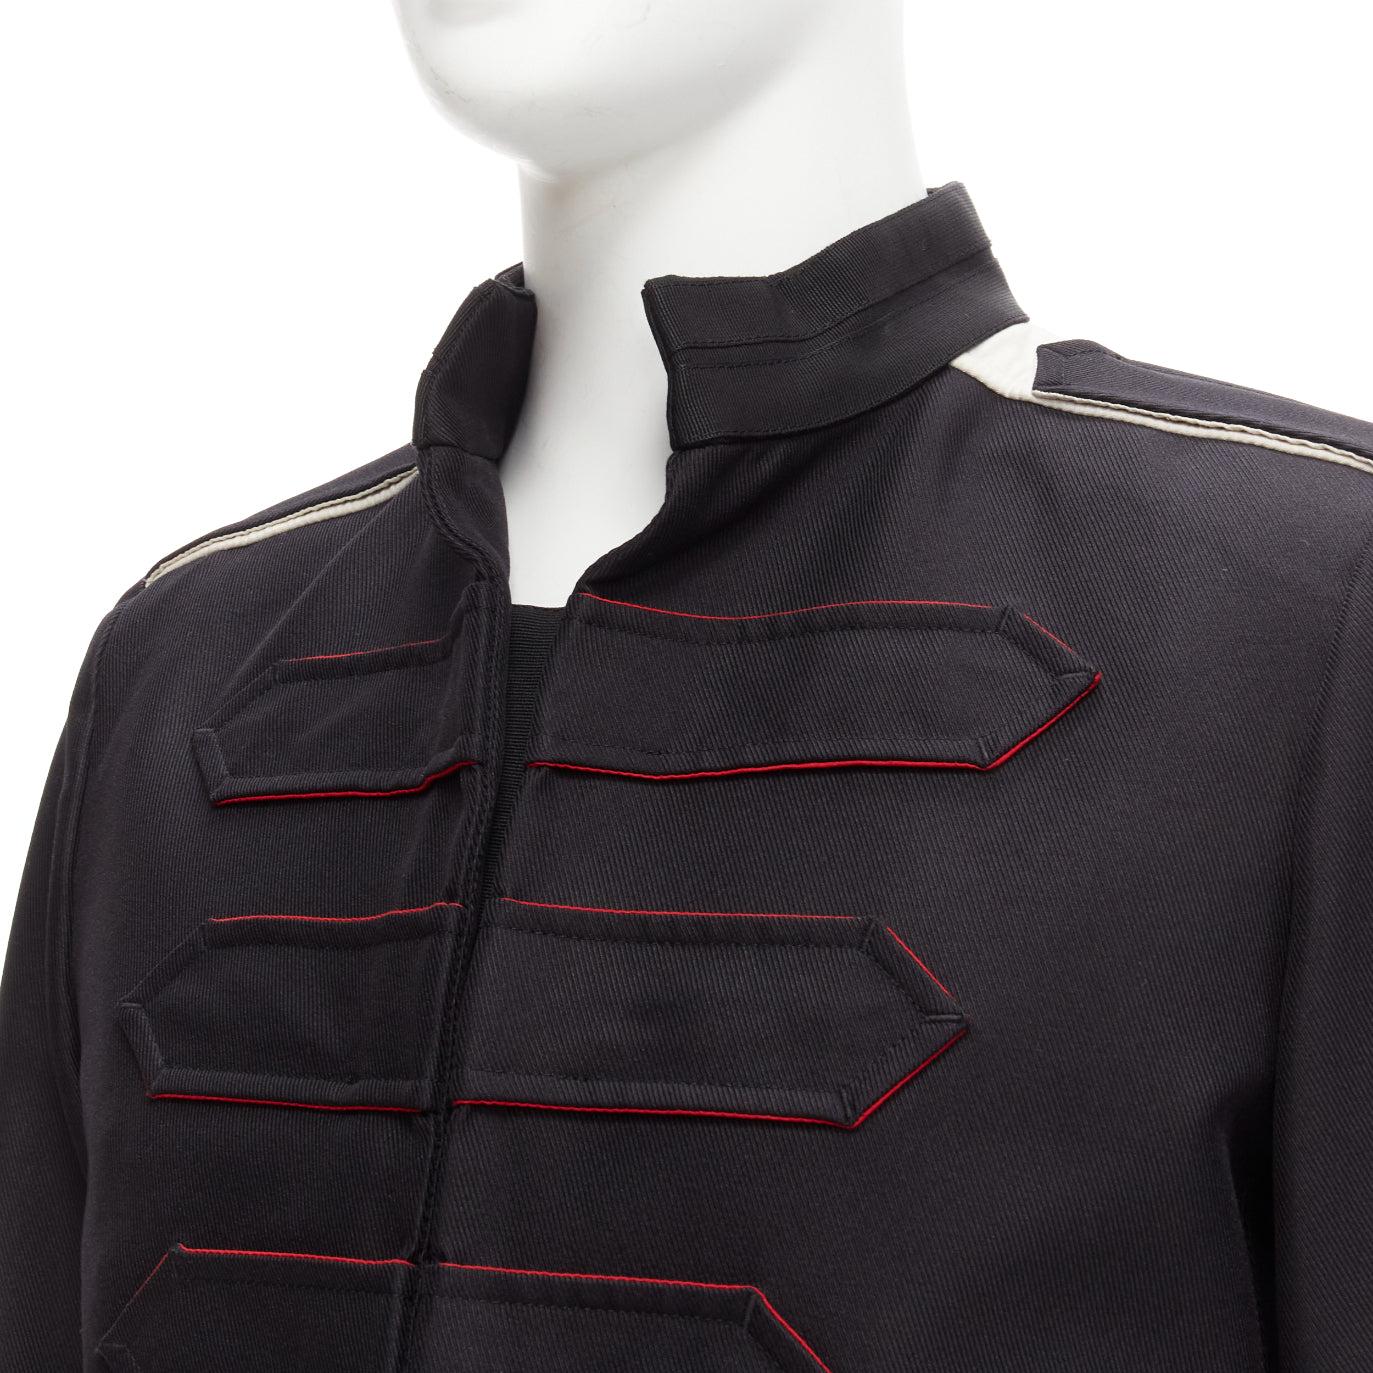 VALENTINO back silk blend white epaulets cuff panelled military jacket IT48 M
Reference: JSLE/A00075
Brand: Valentino
Designer: Pier Paolo Piccioli
Material: Silk, Blend
Color: Black, White
Pattern: Solid
Closure: Snap Buttons
Lining: Black